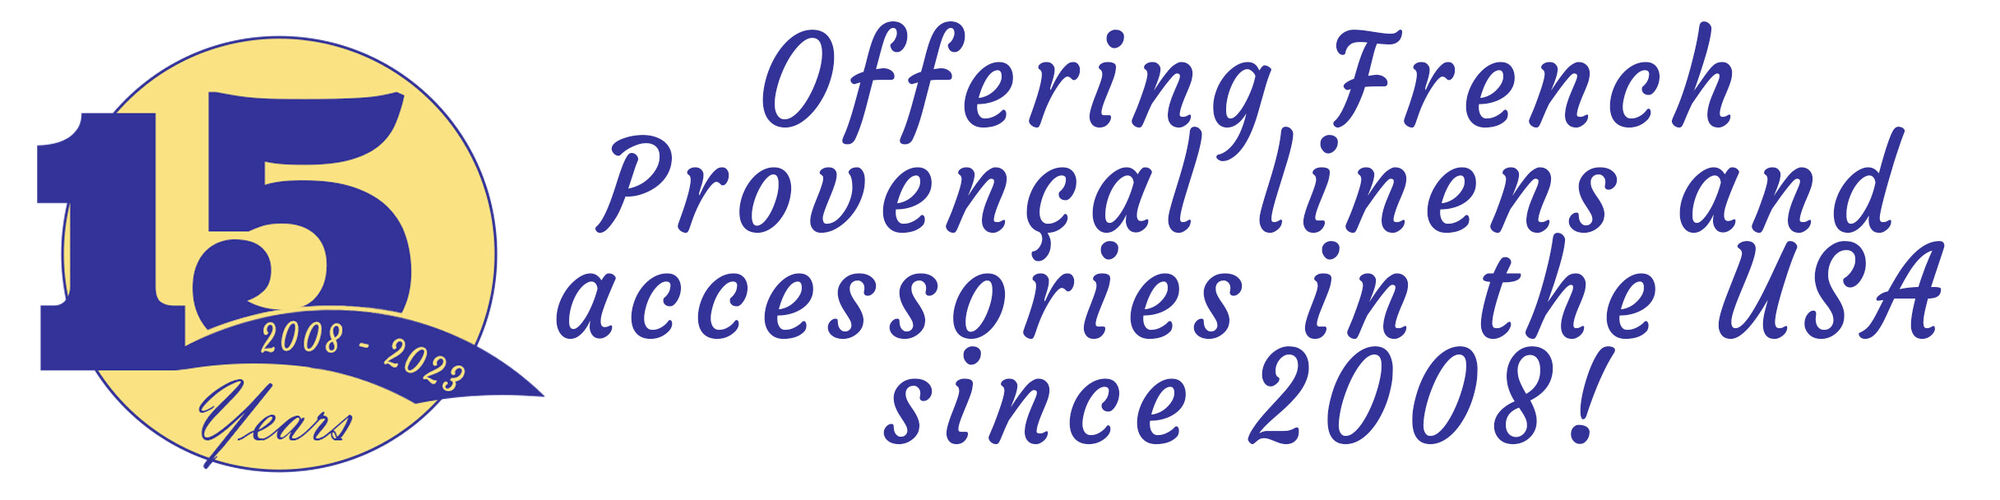 Offering French Provenal linens and accessories in the USA since 2008!